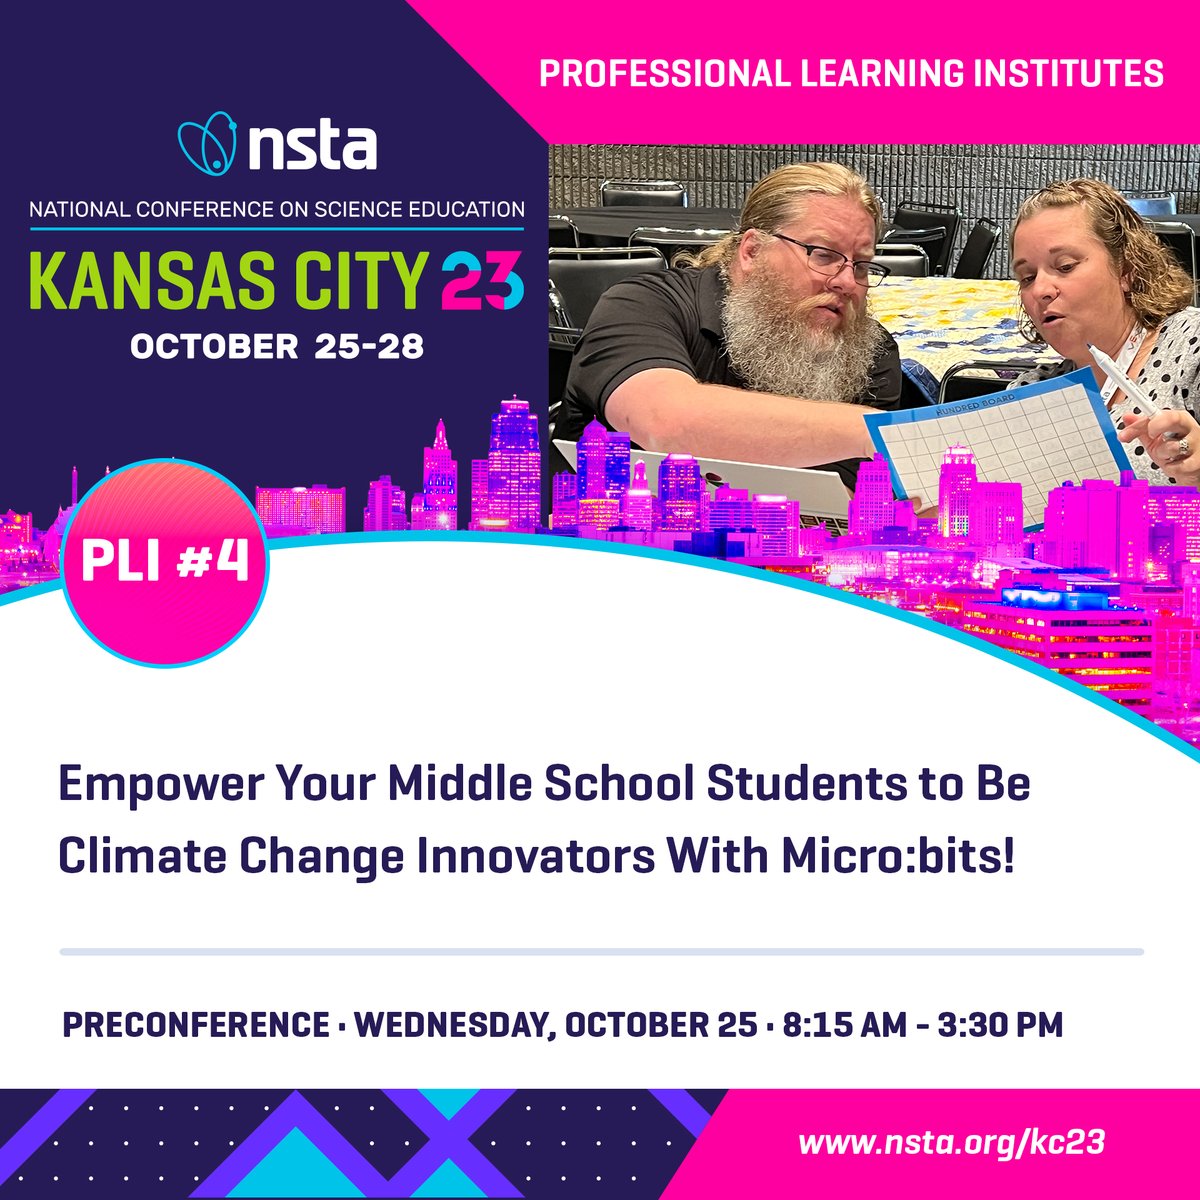 Attend the #NSTA23 KC professional learning institute this fall, hosted by Amazon Future Engineer! MS educators will study fundamentals of computing science and how to use micro:bits to build solutions for climate change led by @BootUpPD and #NSTA: tinyurl.com/5a7htvx6